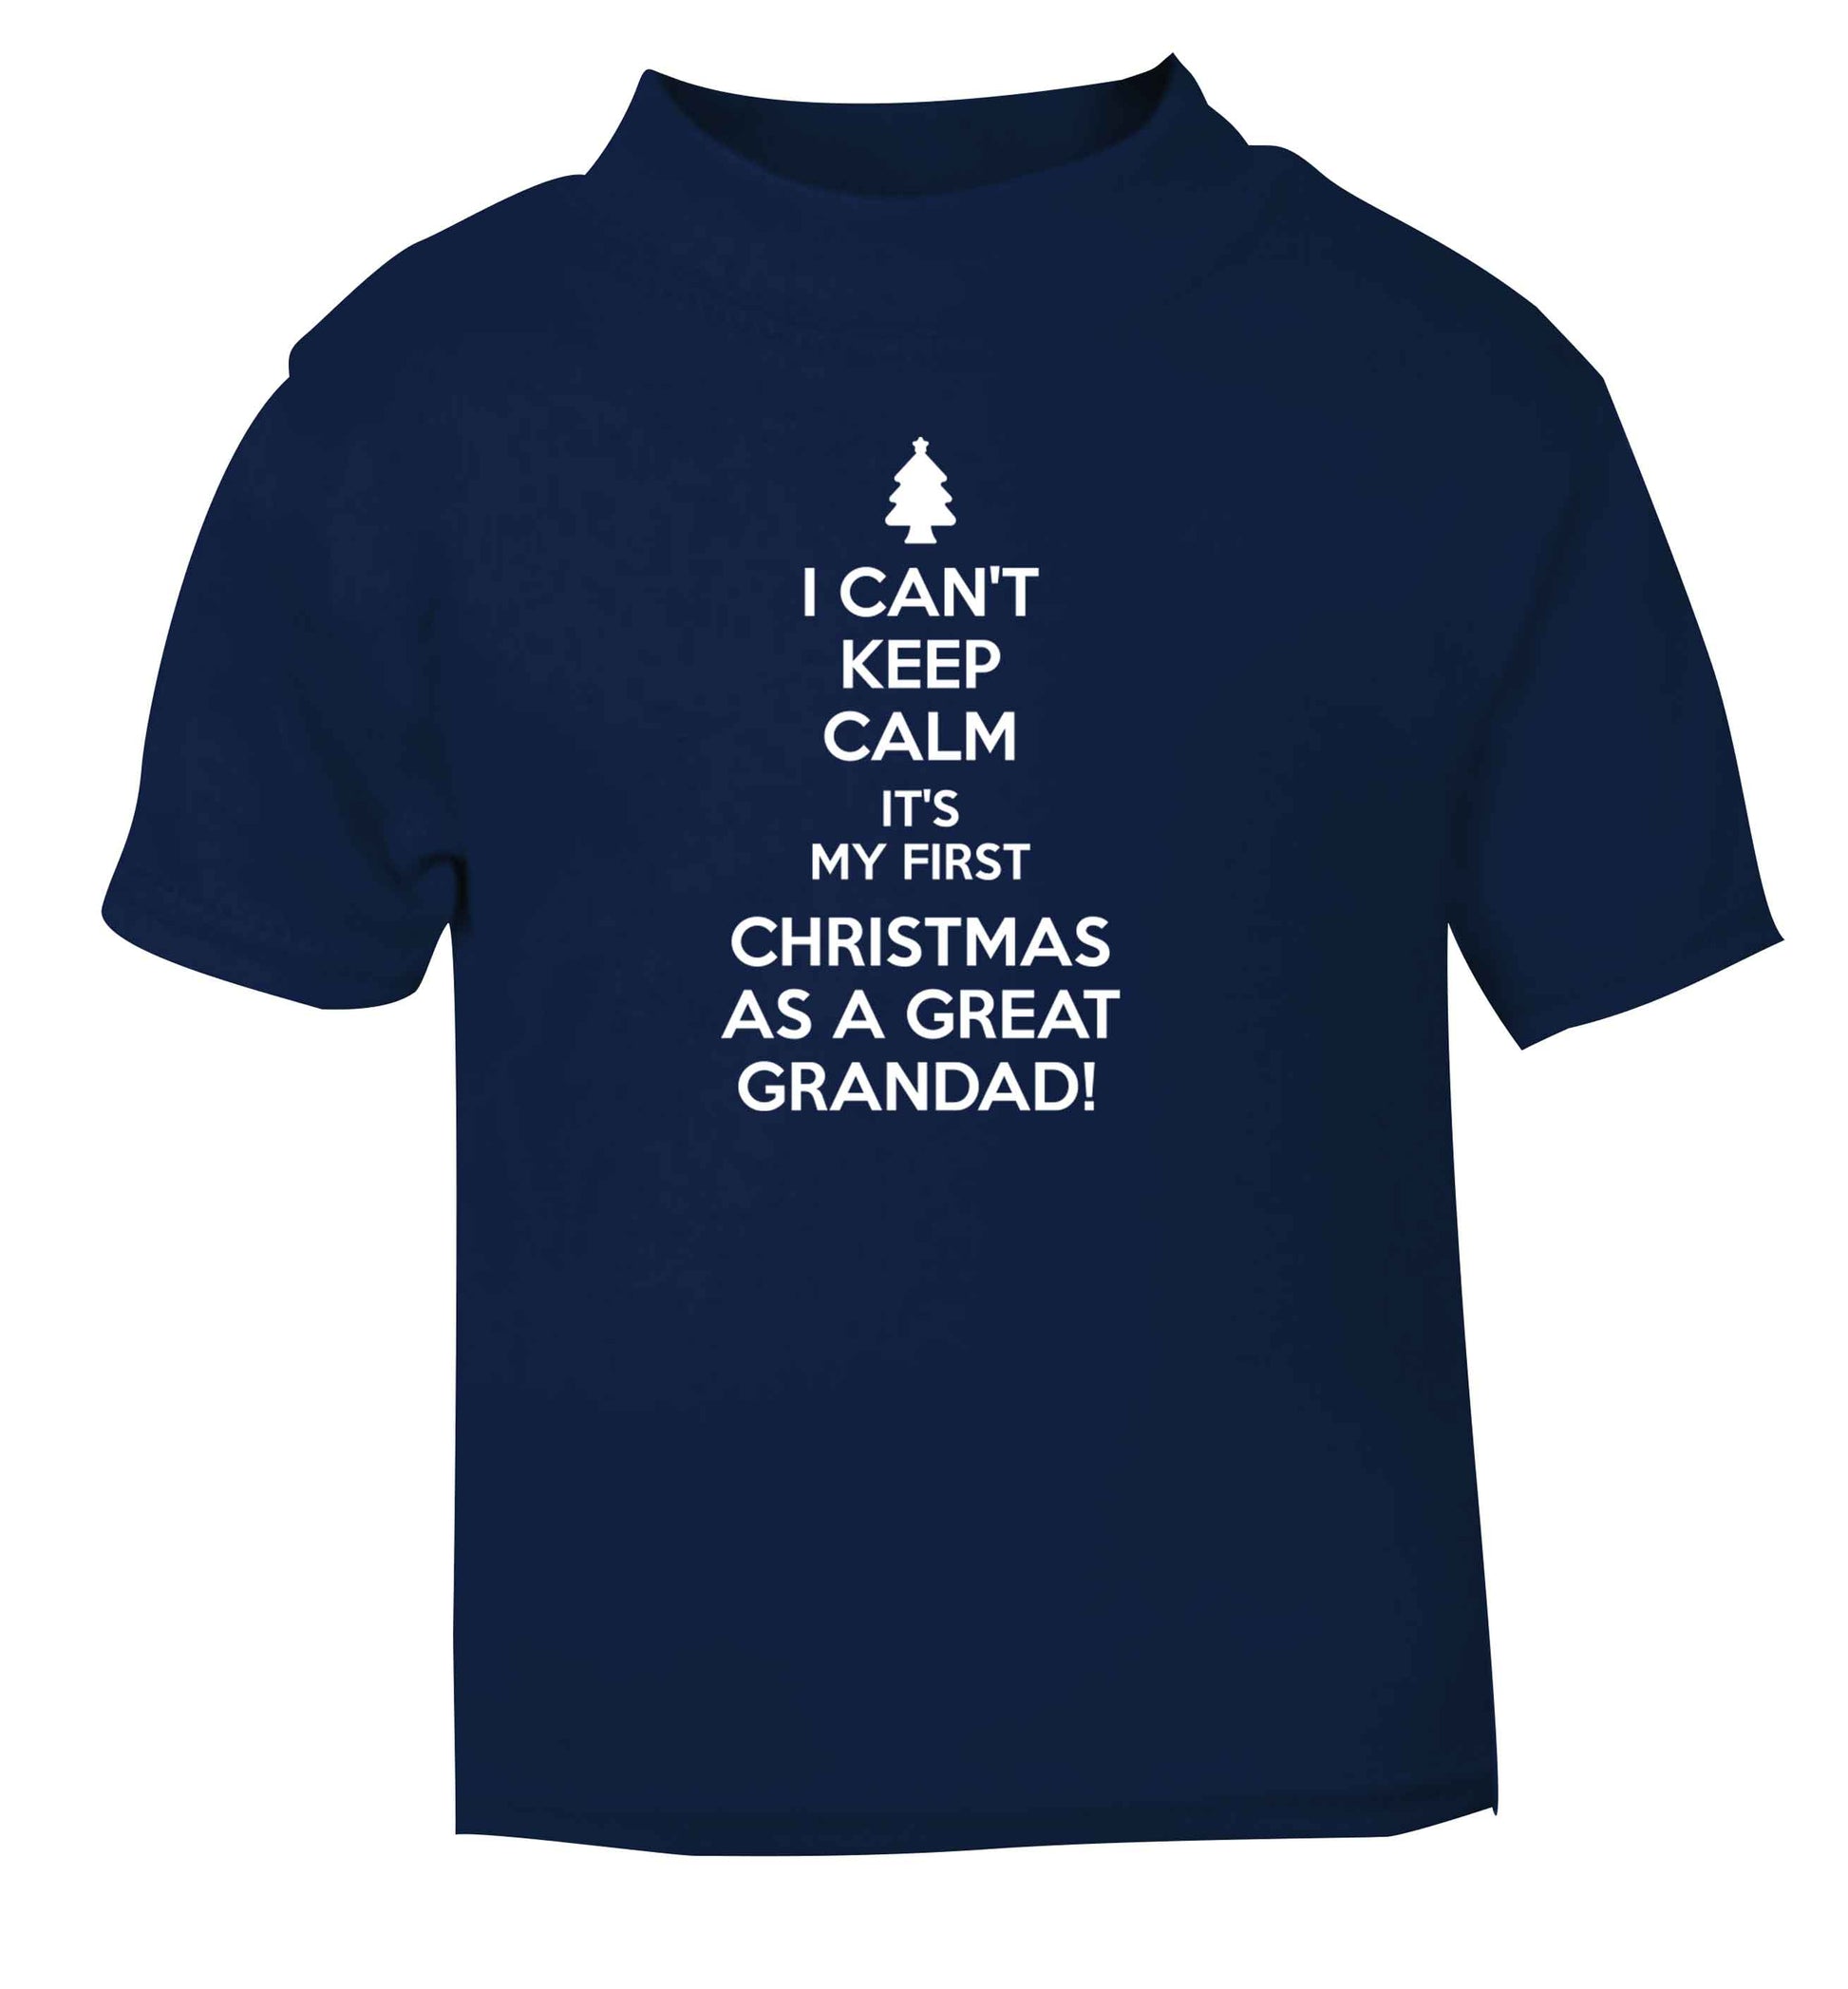 I can't keep calm it's my first Christmas as a great grandad! navy Baby Toddler Tshirt 2 Years